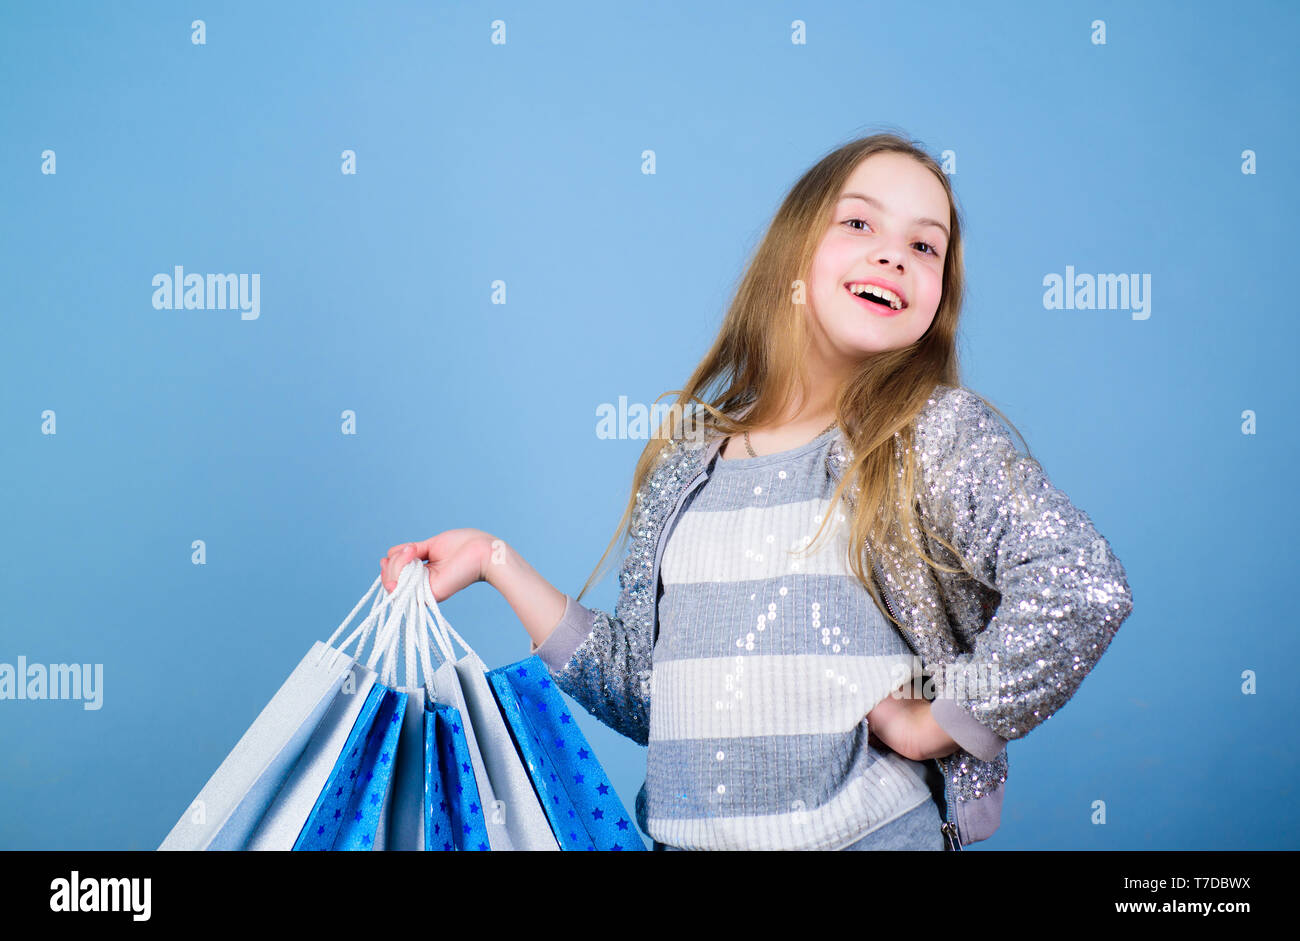 bargain sale. Kid fashion. shop assistant with package. Sales and  discounts. Small girl with shopping bags. Happy child. Little girl with  gifts. special offer. Holiday purchase saving. its a bargain Stock Photo 